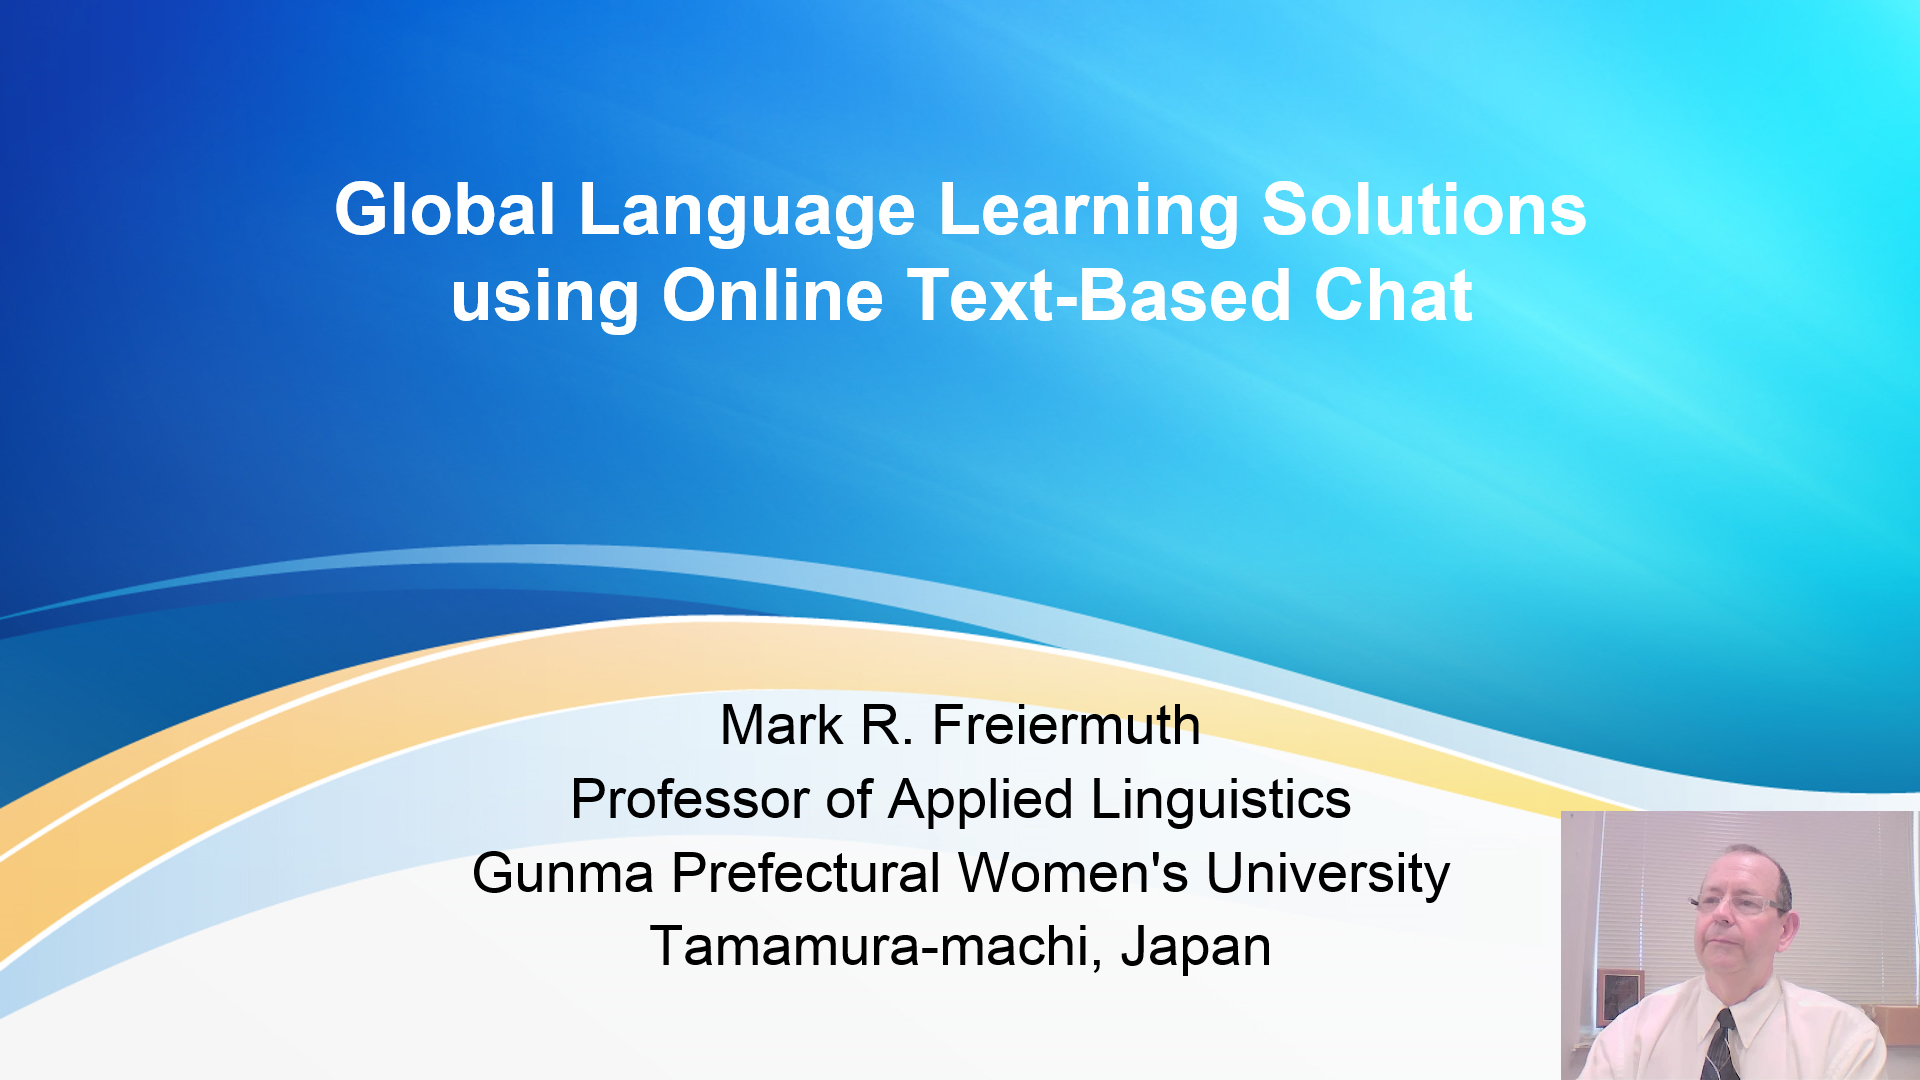 Global Language Learning Solutions using Online Text-Based Chat